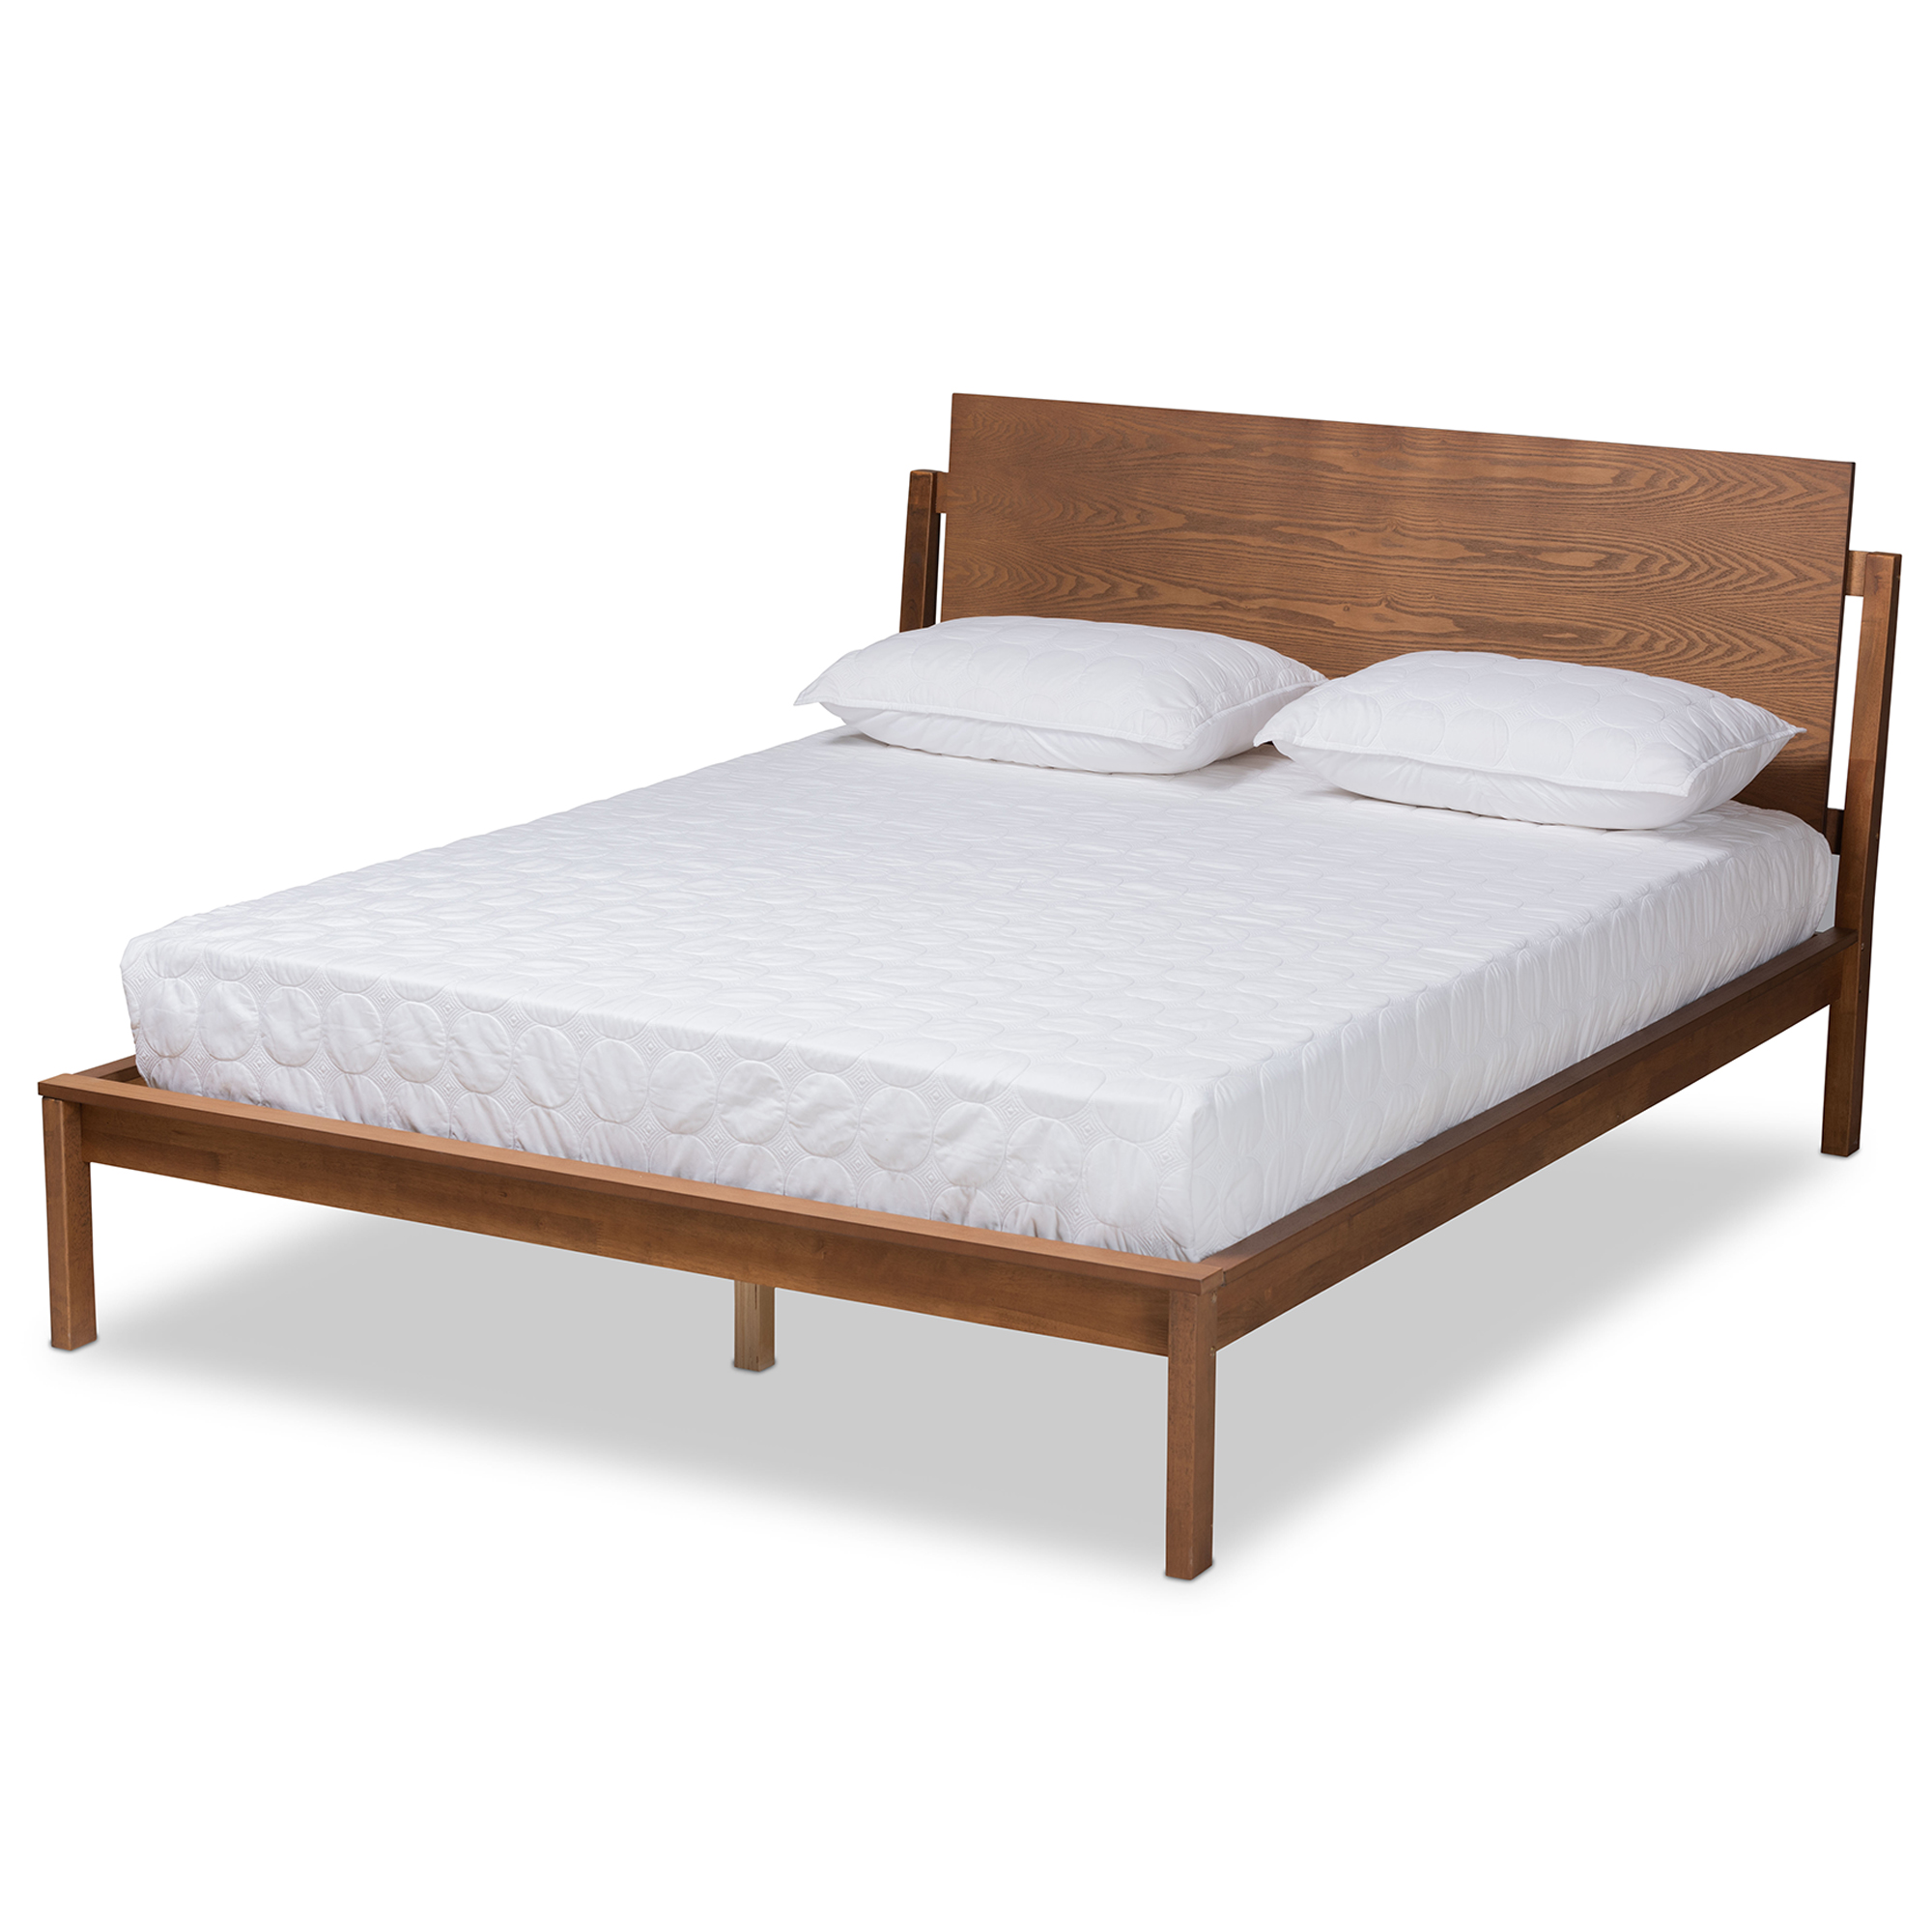 Baxton Studio Giuseppe Modern and Contemporary Walnut Brown Finished King Size Platform Bed